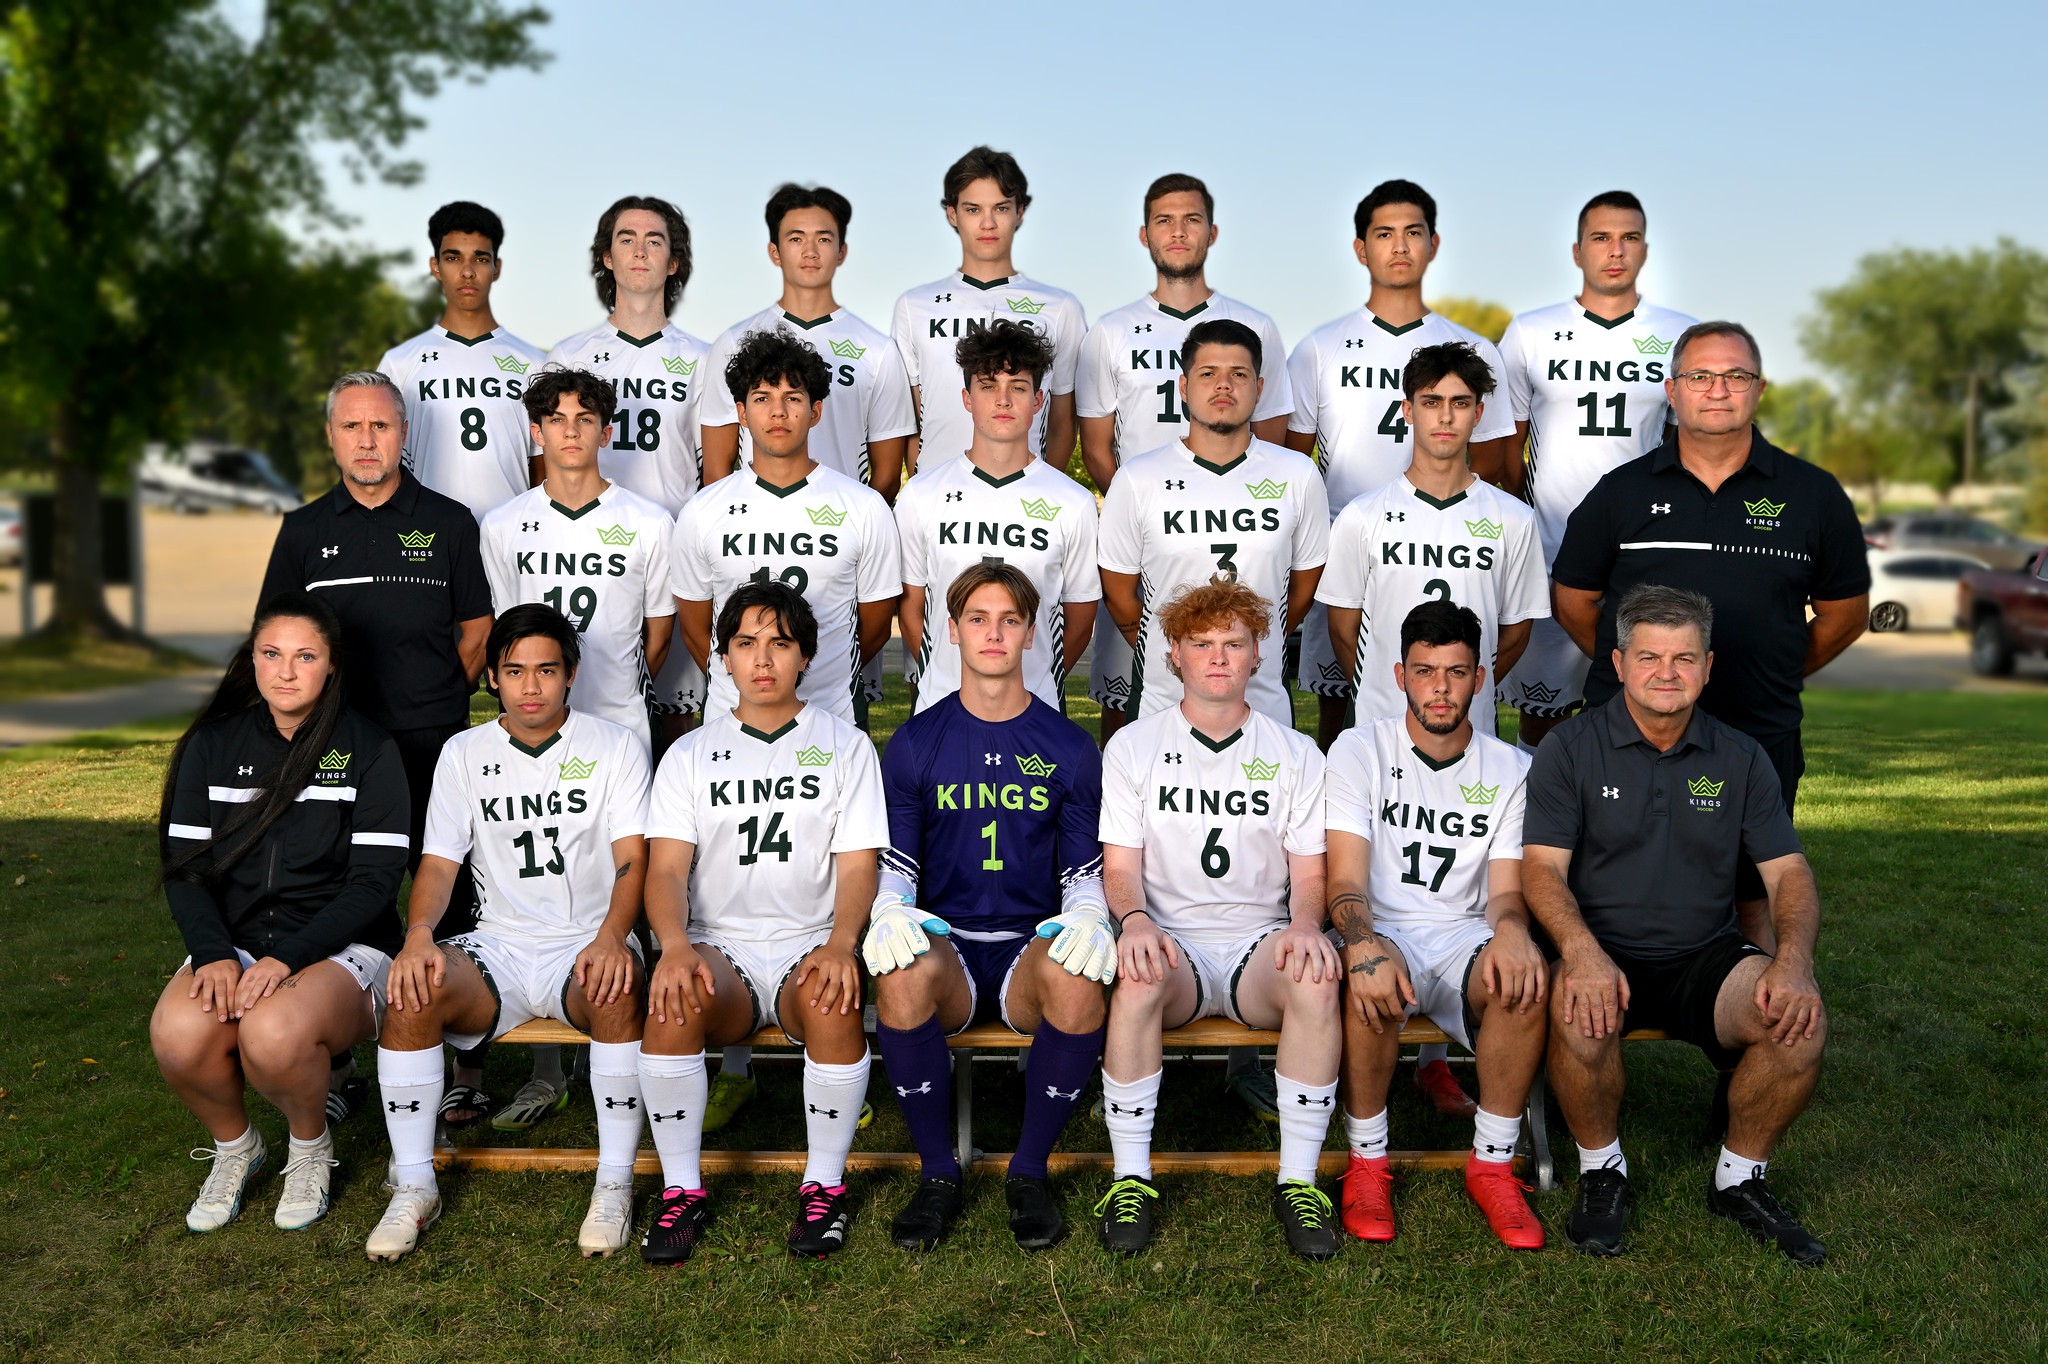 Kings Soccer is looking forward to challenging for the top spot in the South